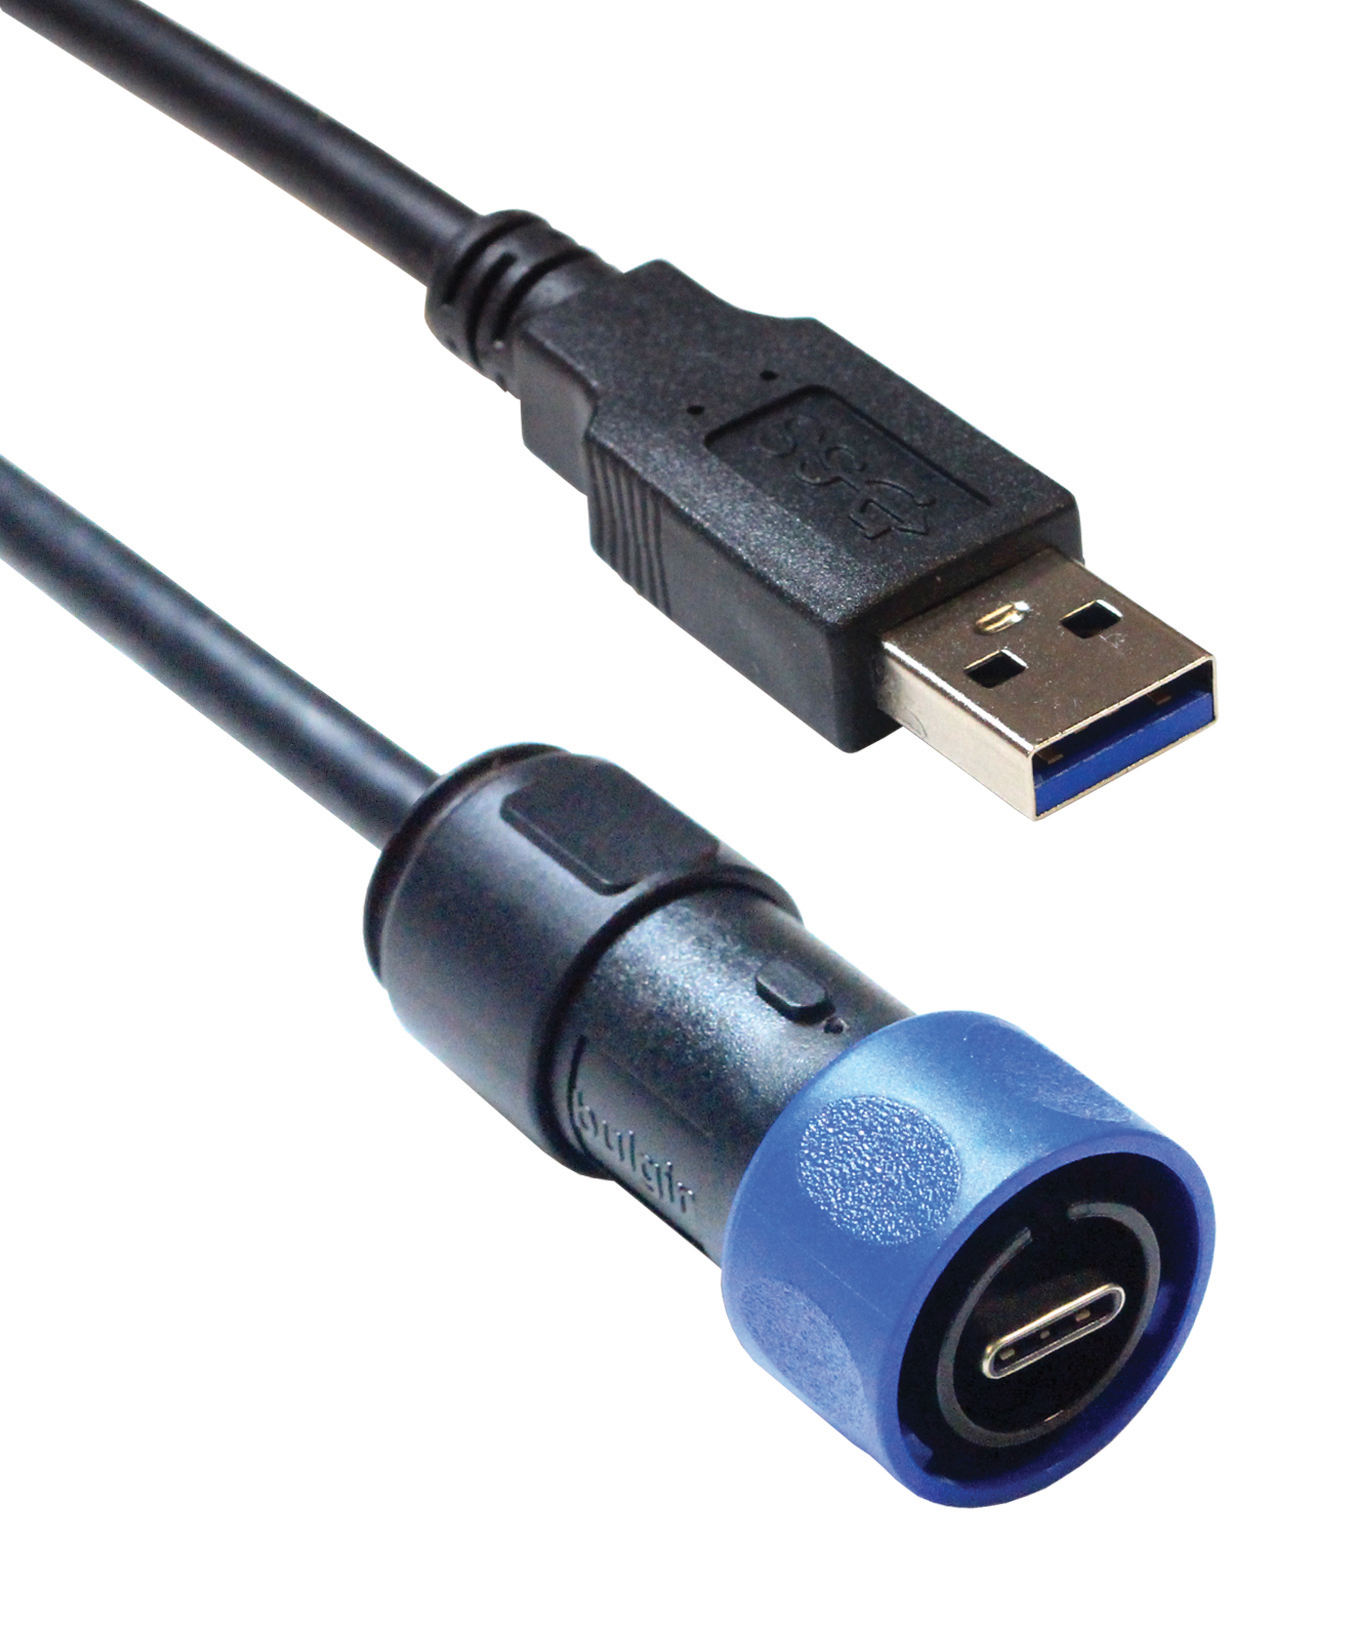 New Connectivity Products: August 2019 - Bulgin 4000 Series C-Type USB Connectors